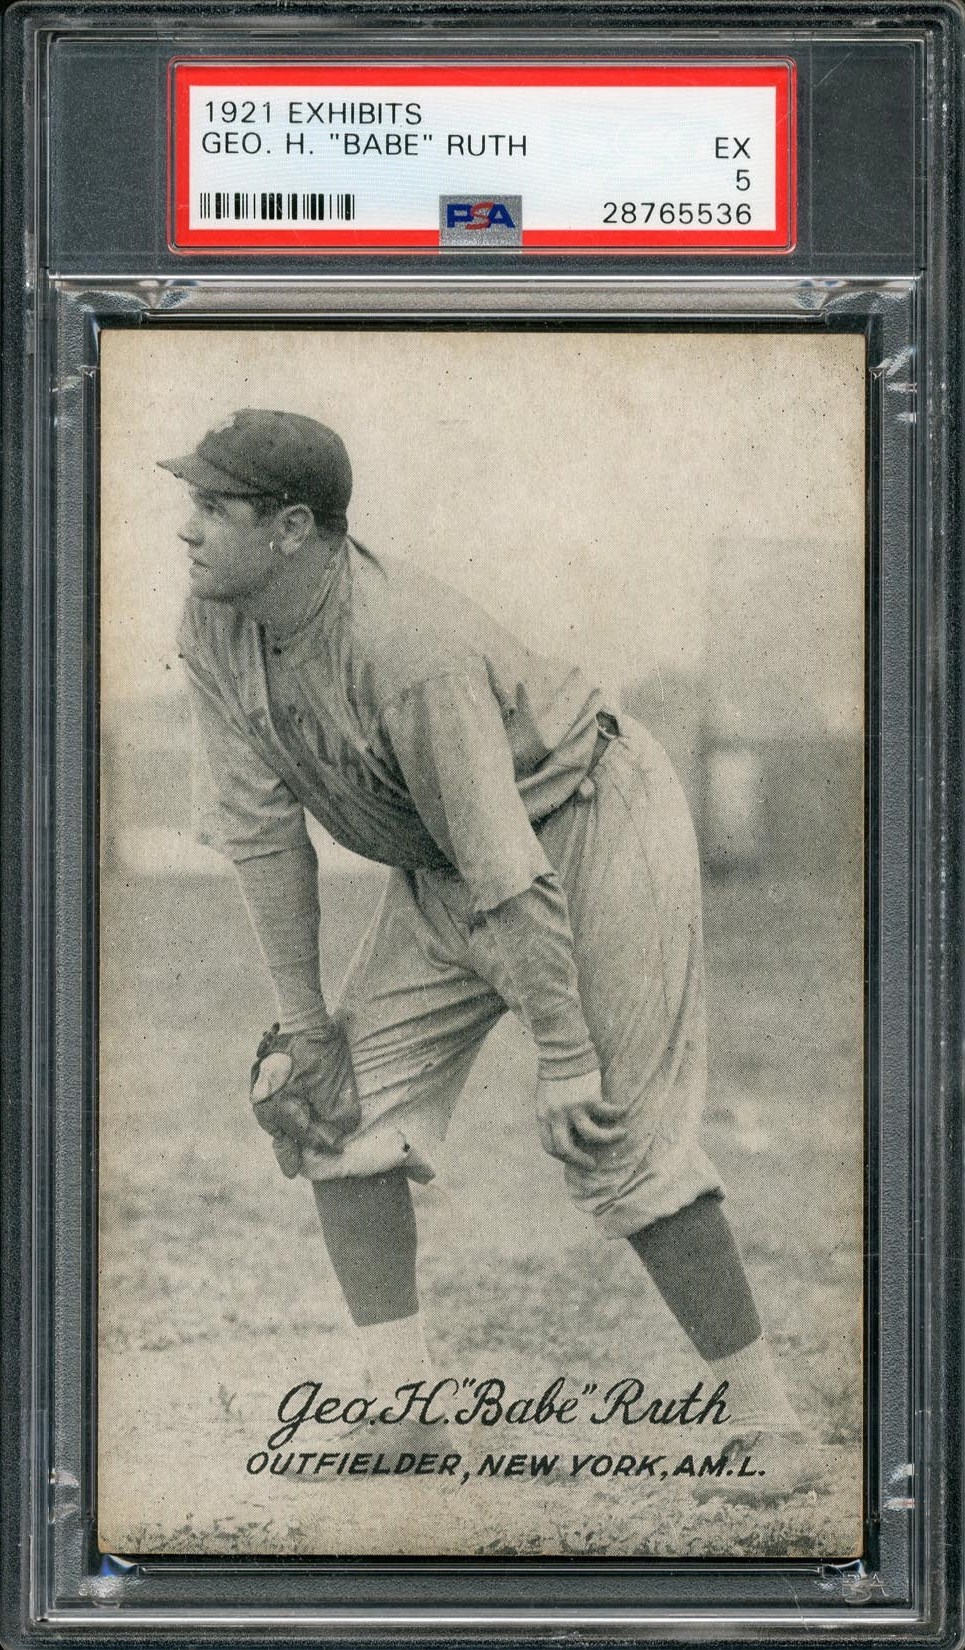 Baseball and Trading Cards - 1921 Exhibits Geo. H. "Babe" Ruth - PSA EX 5